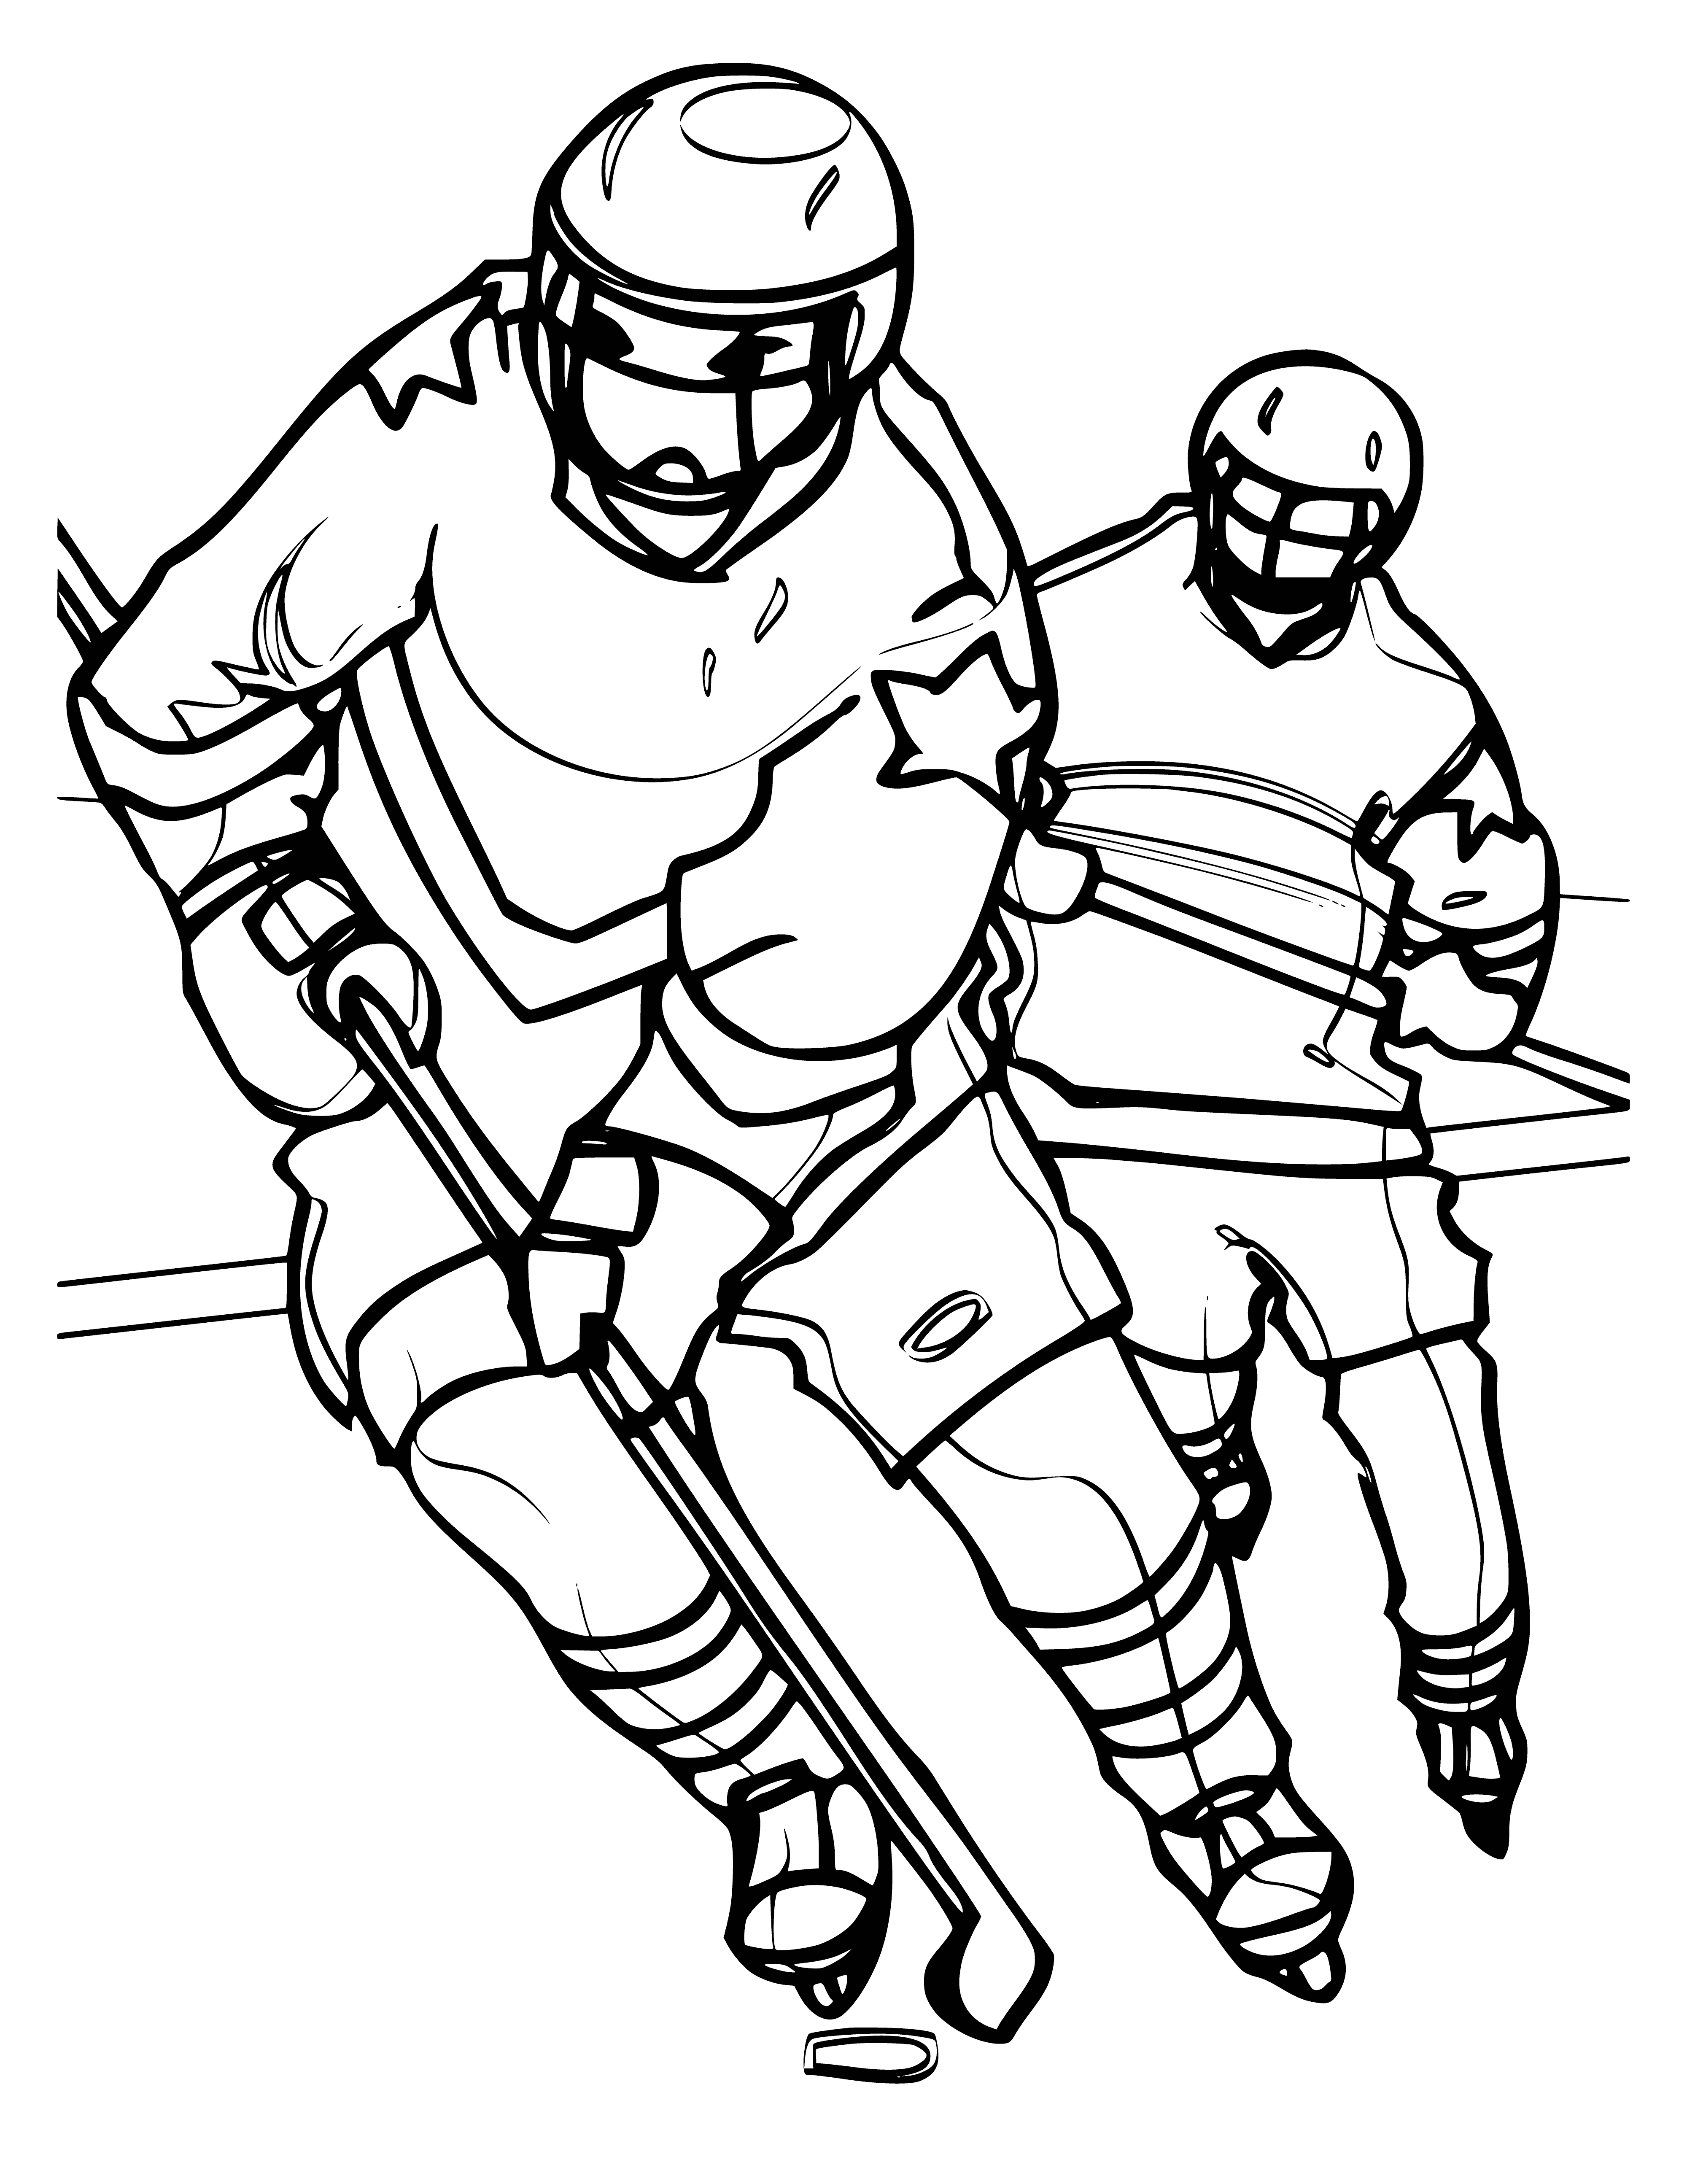 Hockey players coloring page